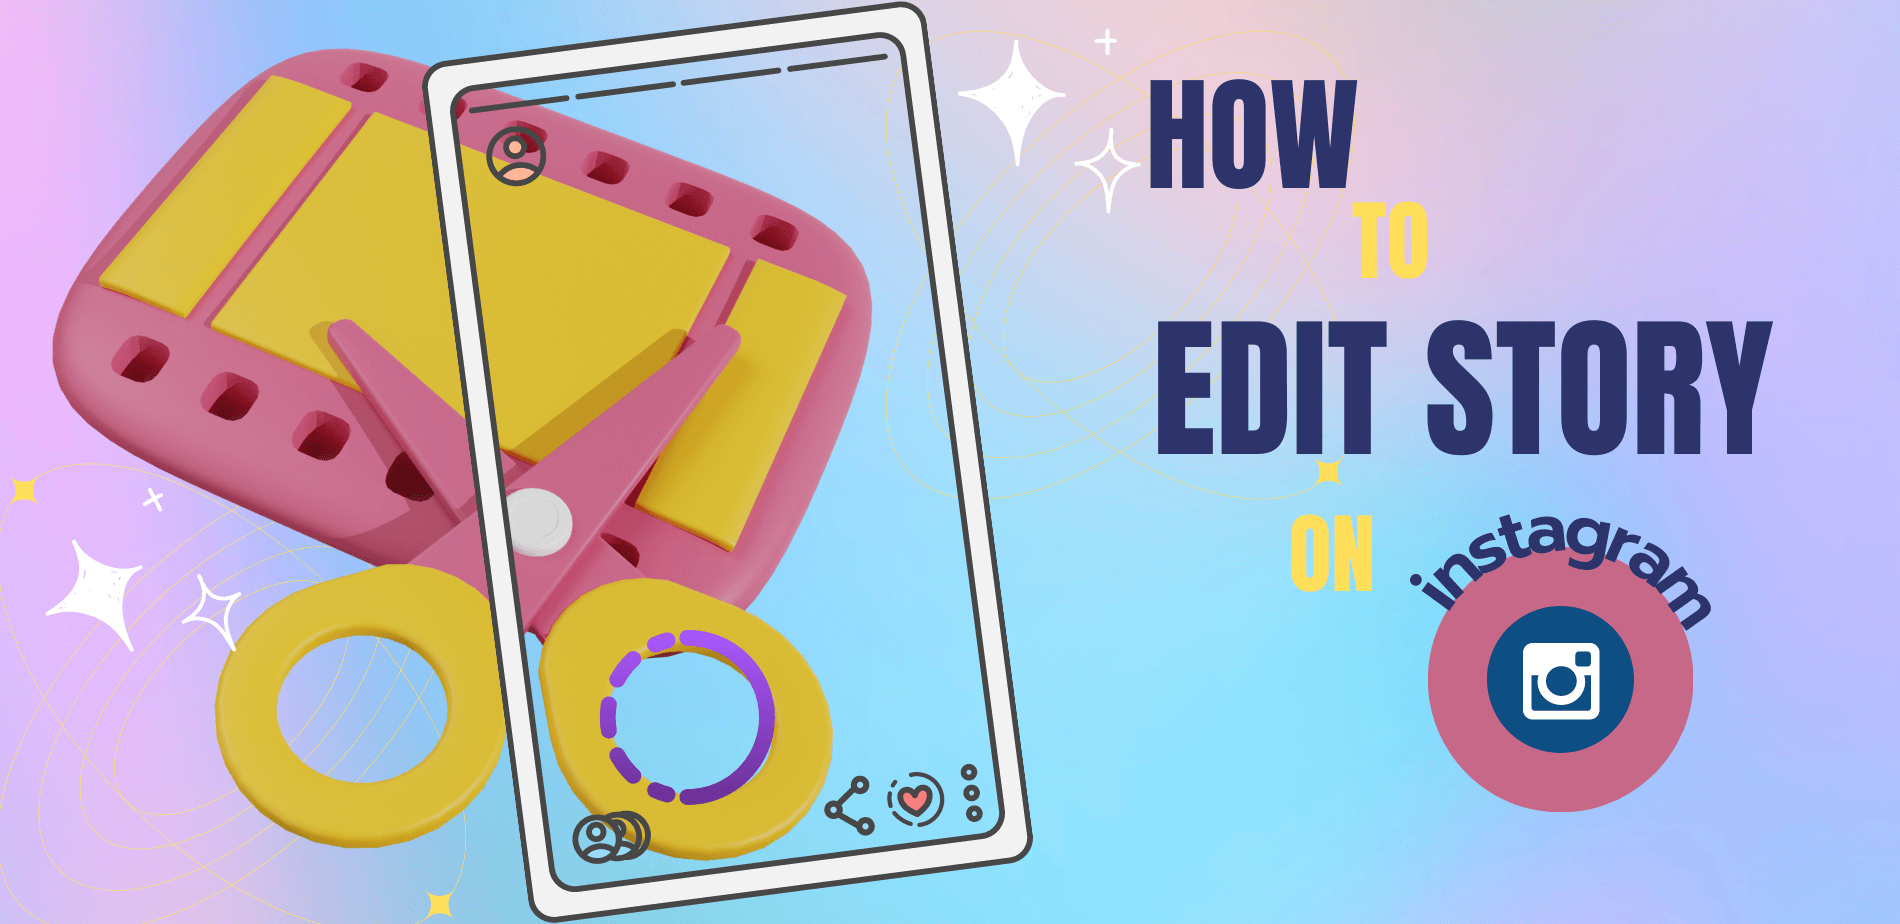 how to edit story on instagram